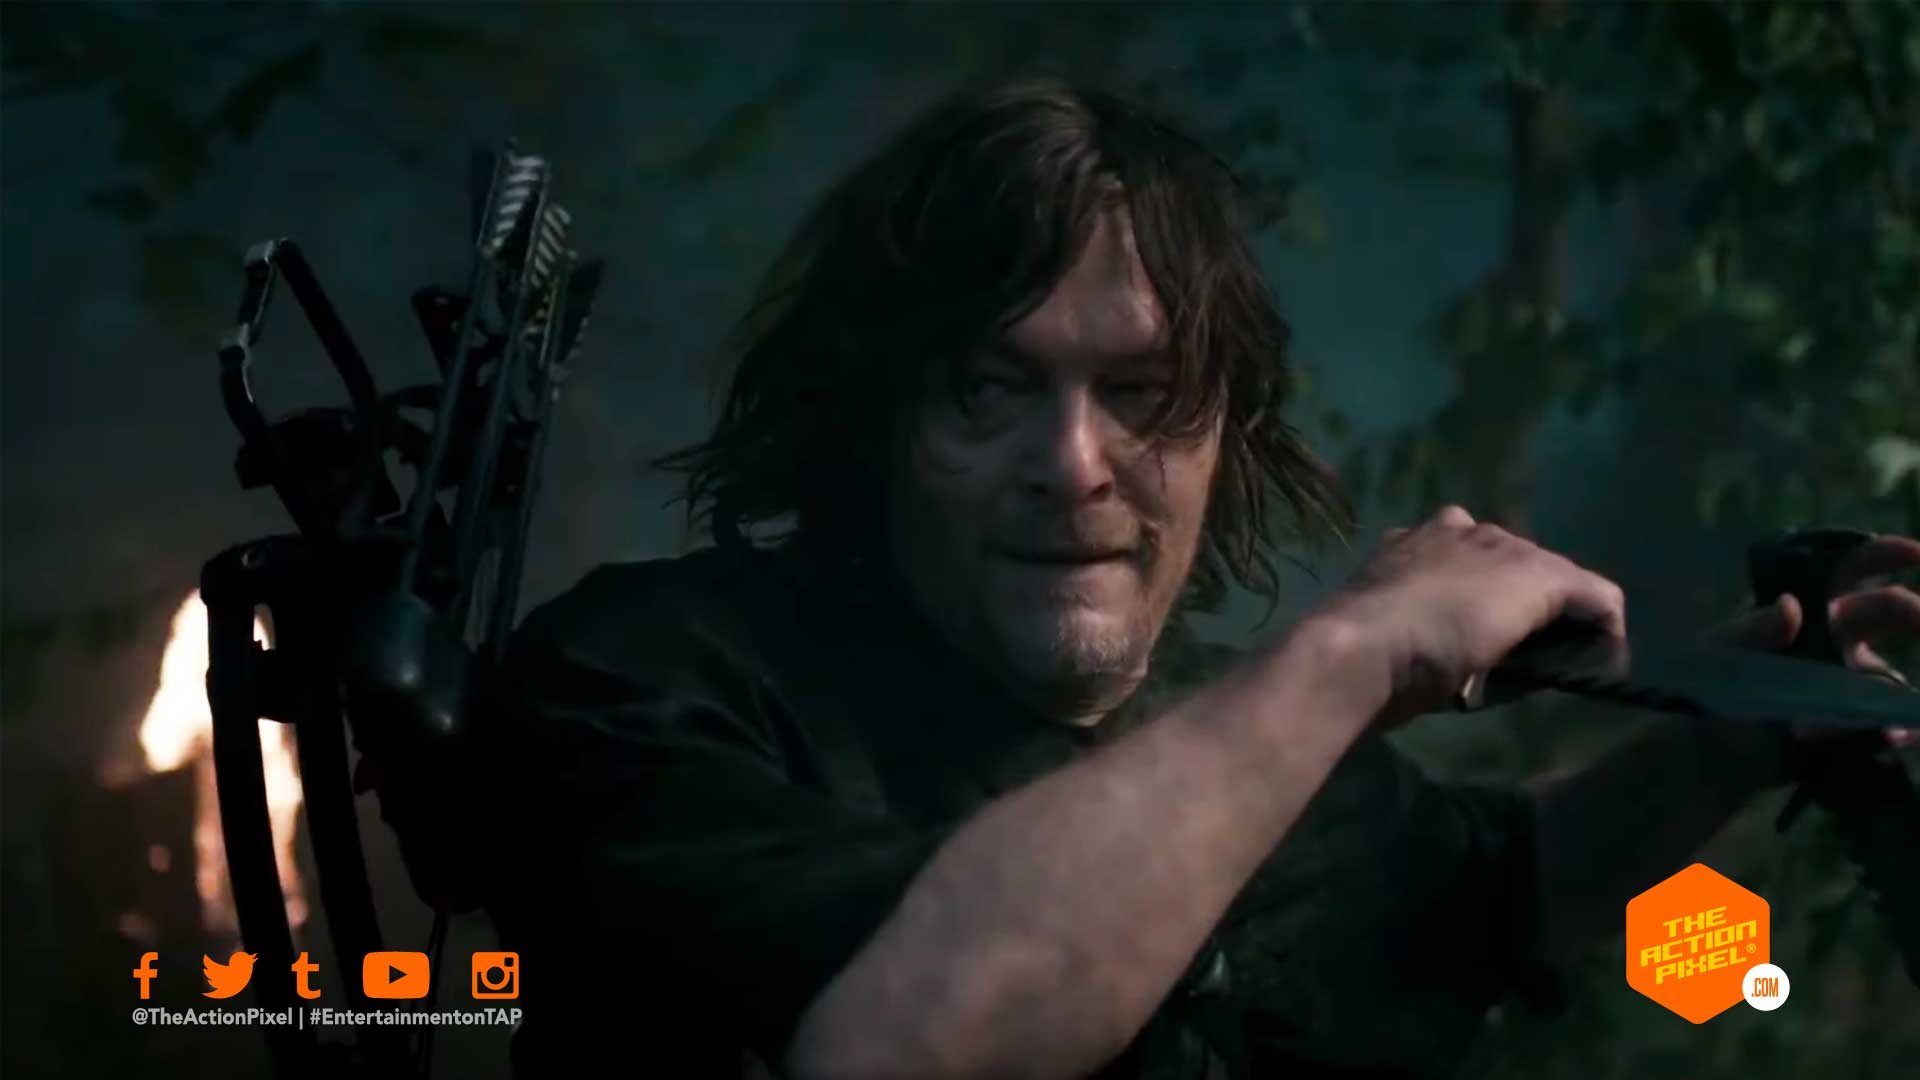 silence, norman reedus, danai , the walking dead season 10, the walking dead, entertainment on tap, the action pixel, featured,